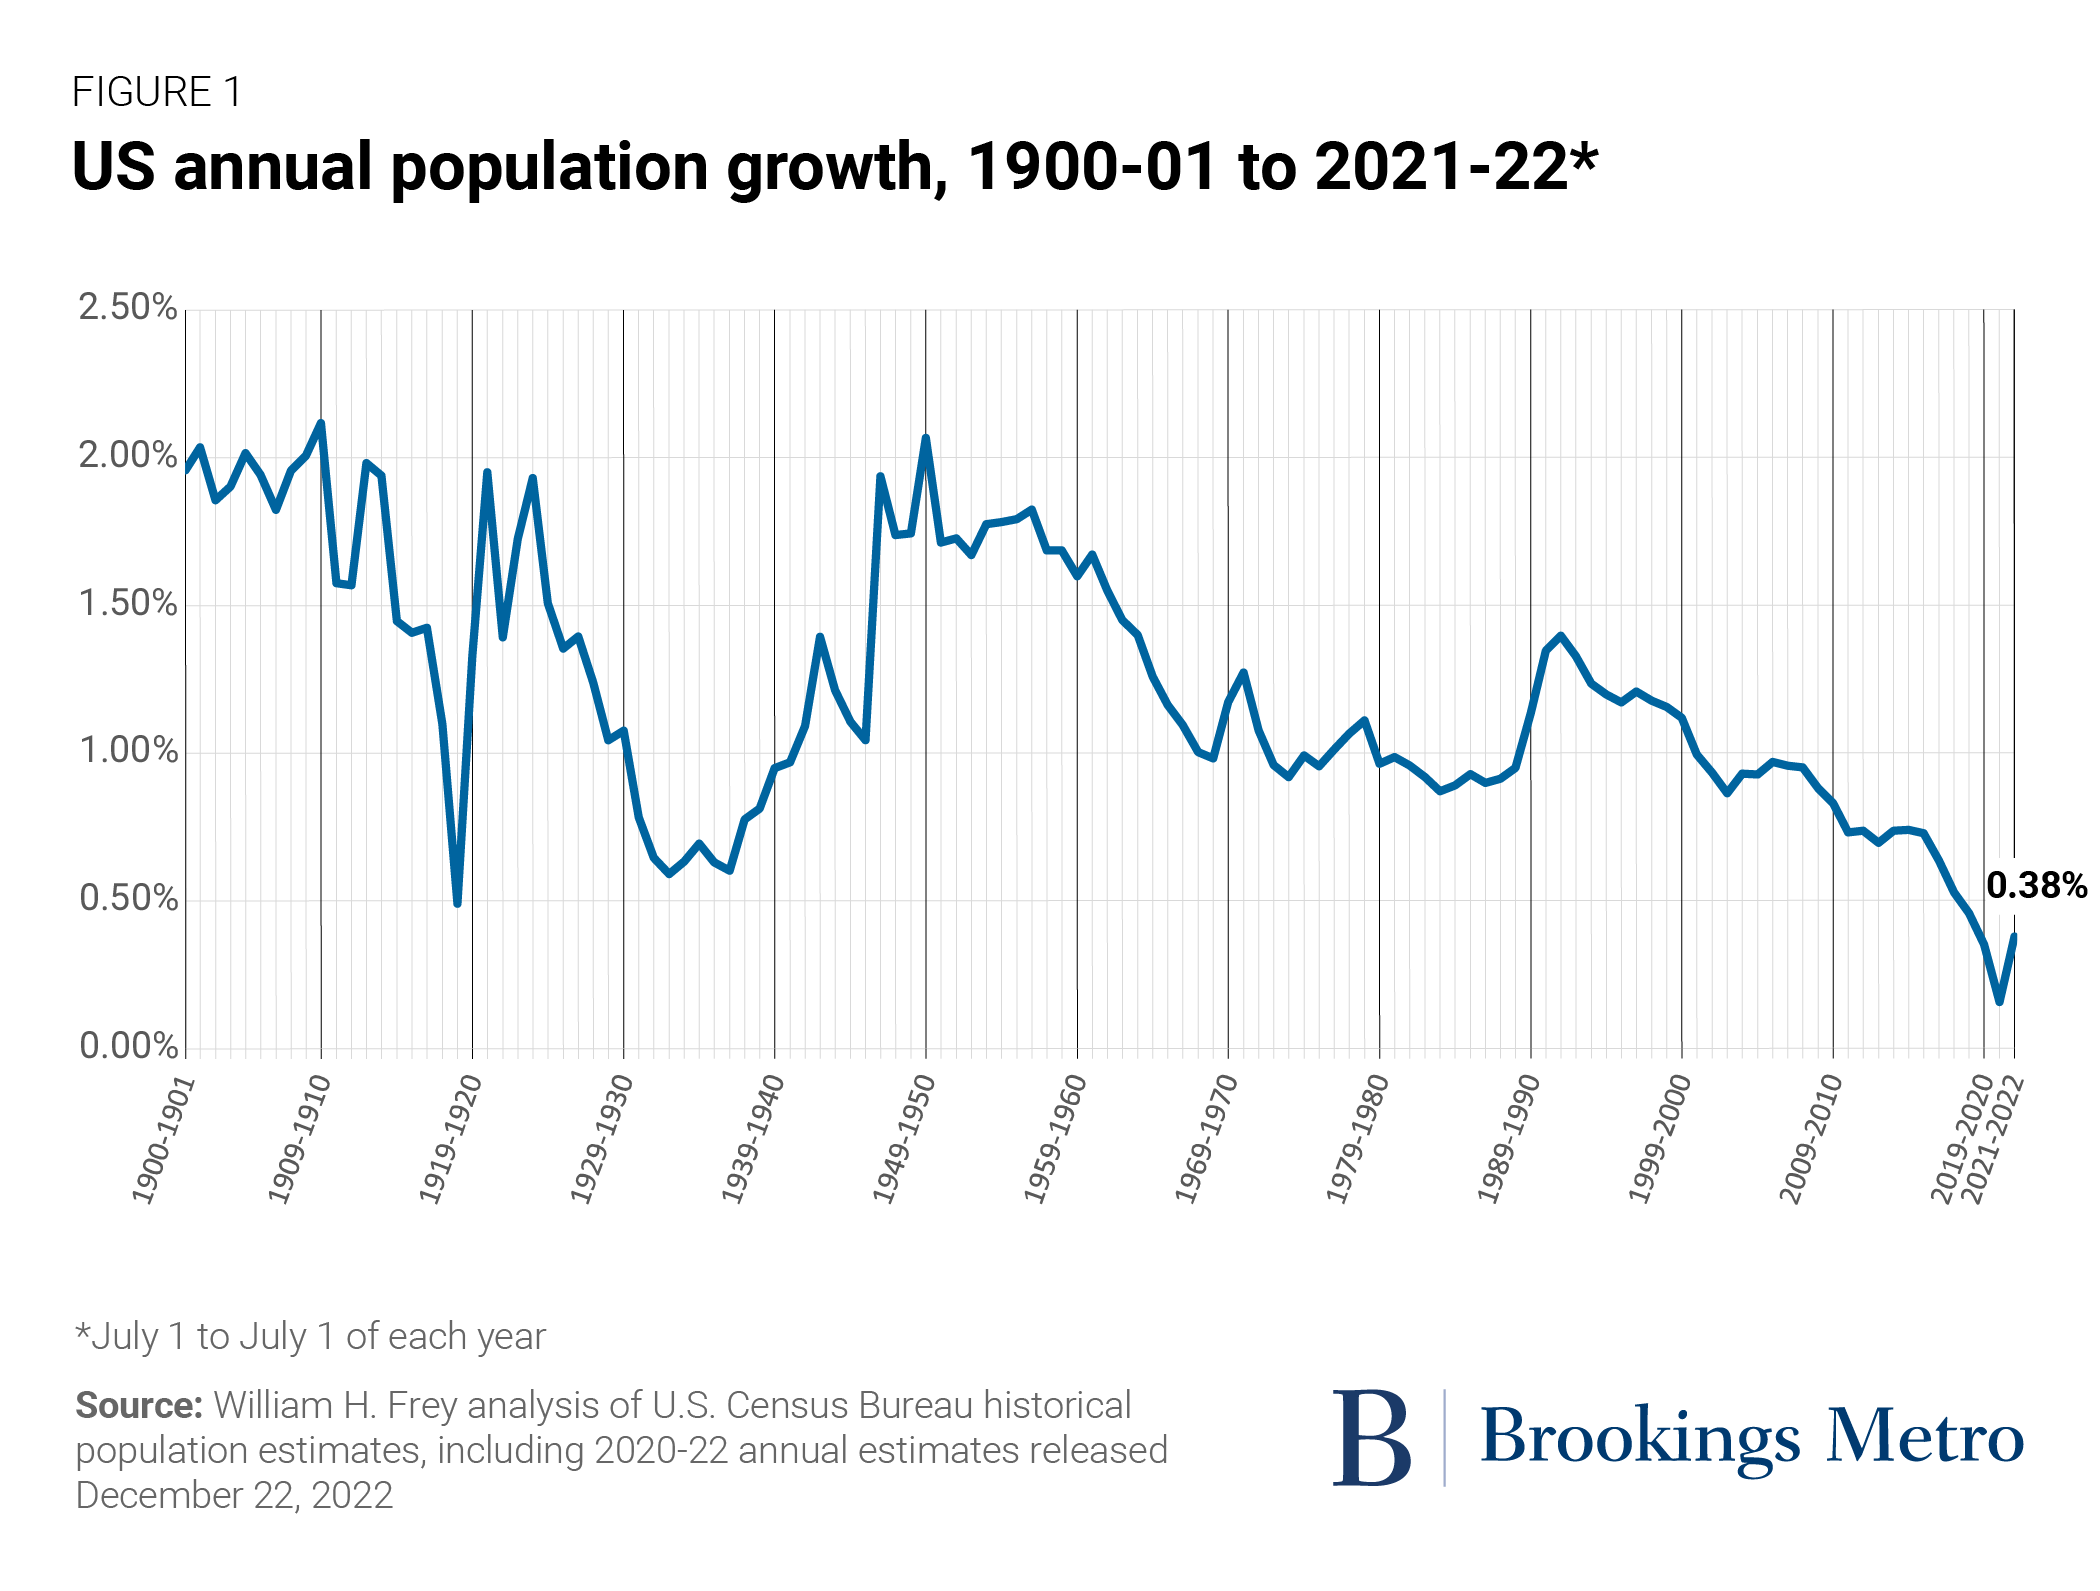 New census estimates show a tepid rise in U.S. population growth